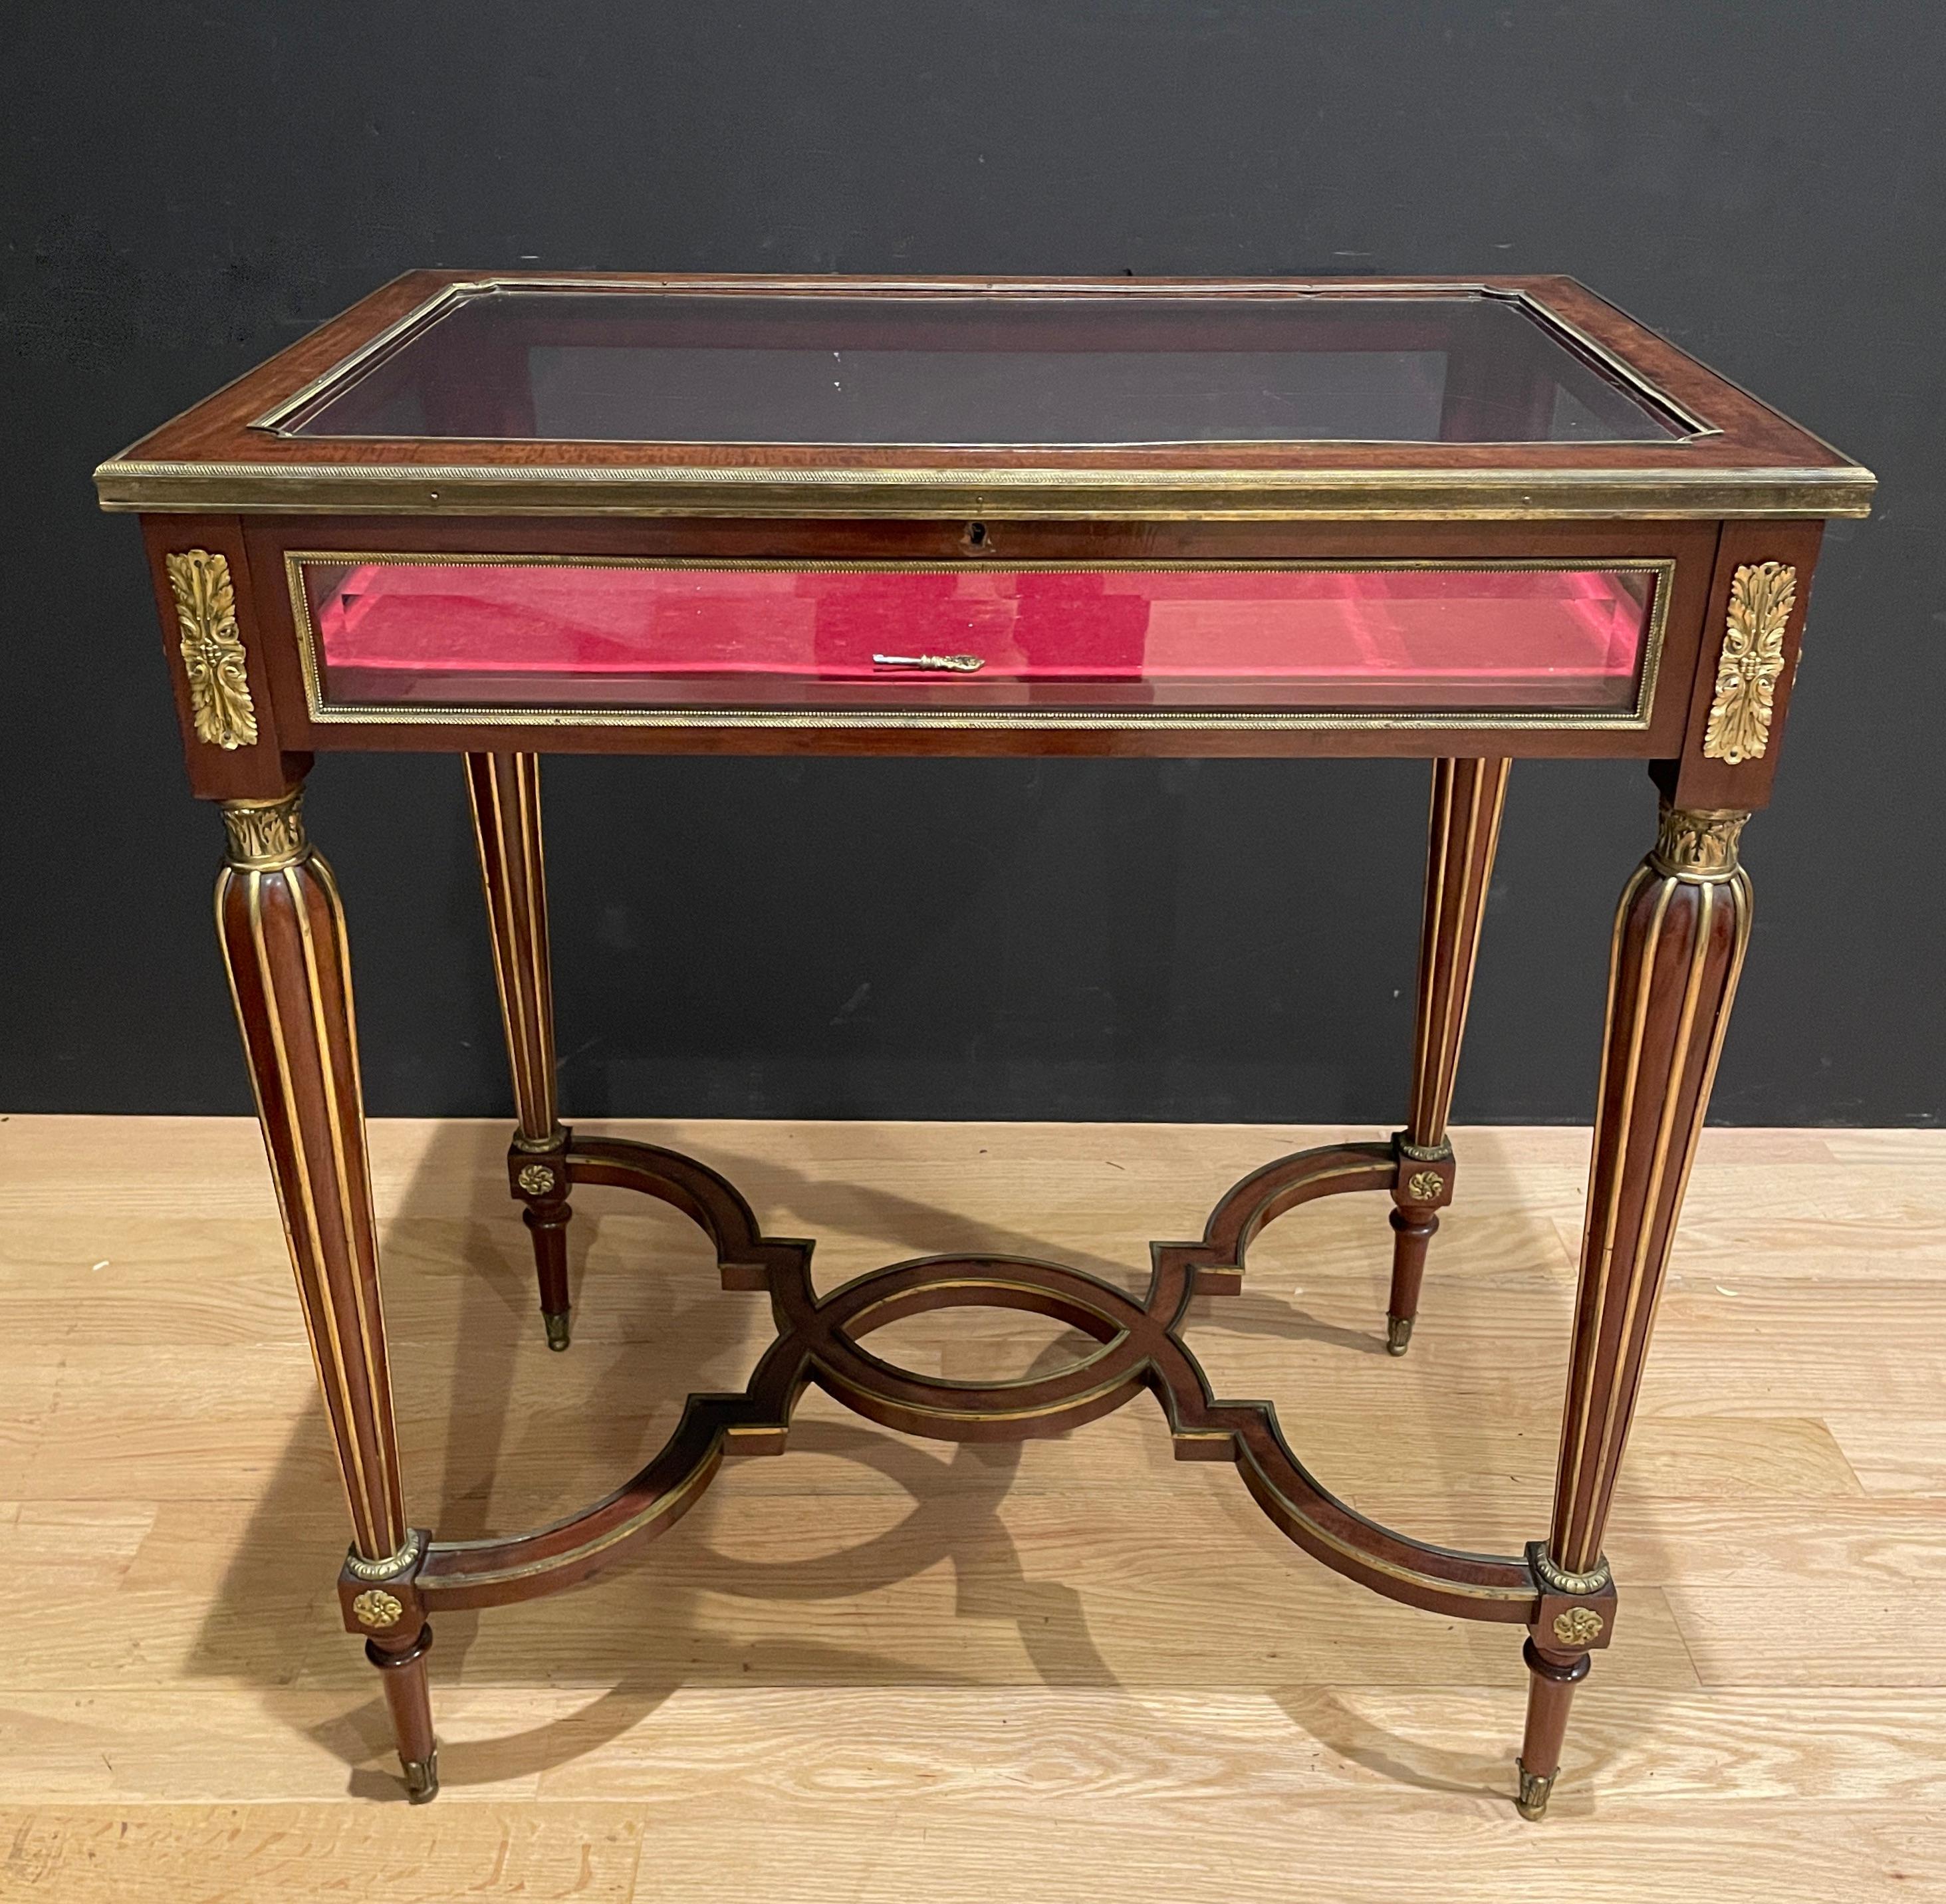 Fine quality 19th century gilt bronze mounted and glass vitrine table. Top and 4 sides of beveled glass with a red velvet lined interior. Burn mark on bottom for C. Mellier & Co. 

C. Mellier & Co 
 The firm of C. Mellier & Co. was founded by